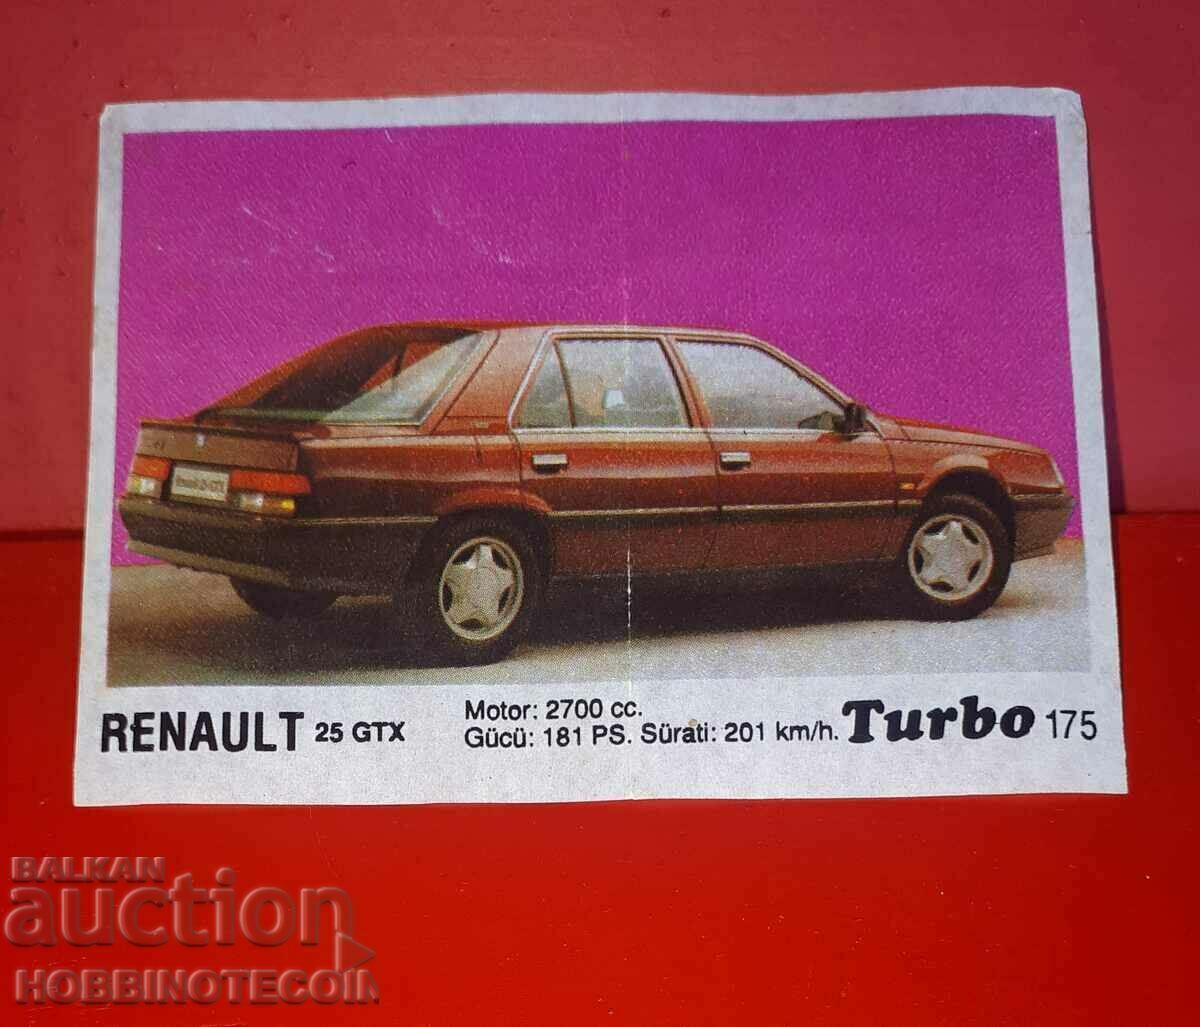 PICTURE TURBO TURBO N 175 RENAULT 25 GTX